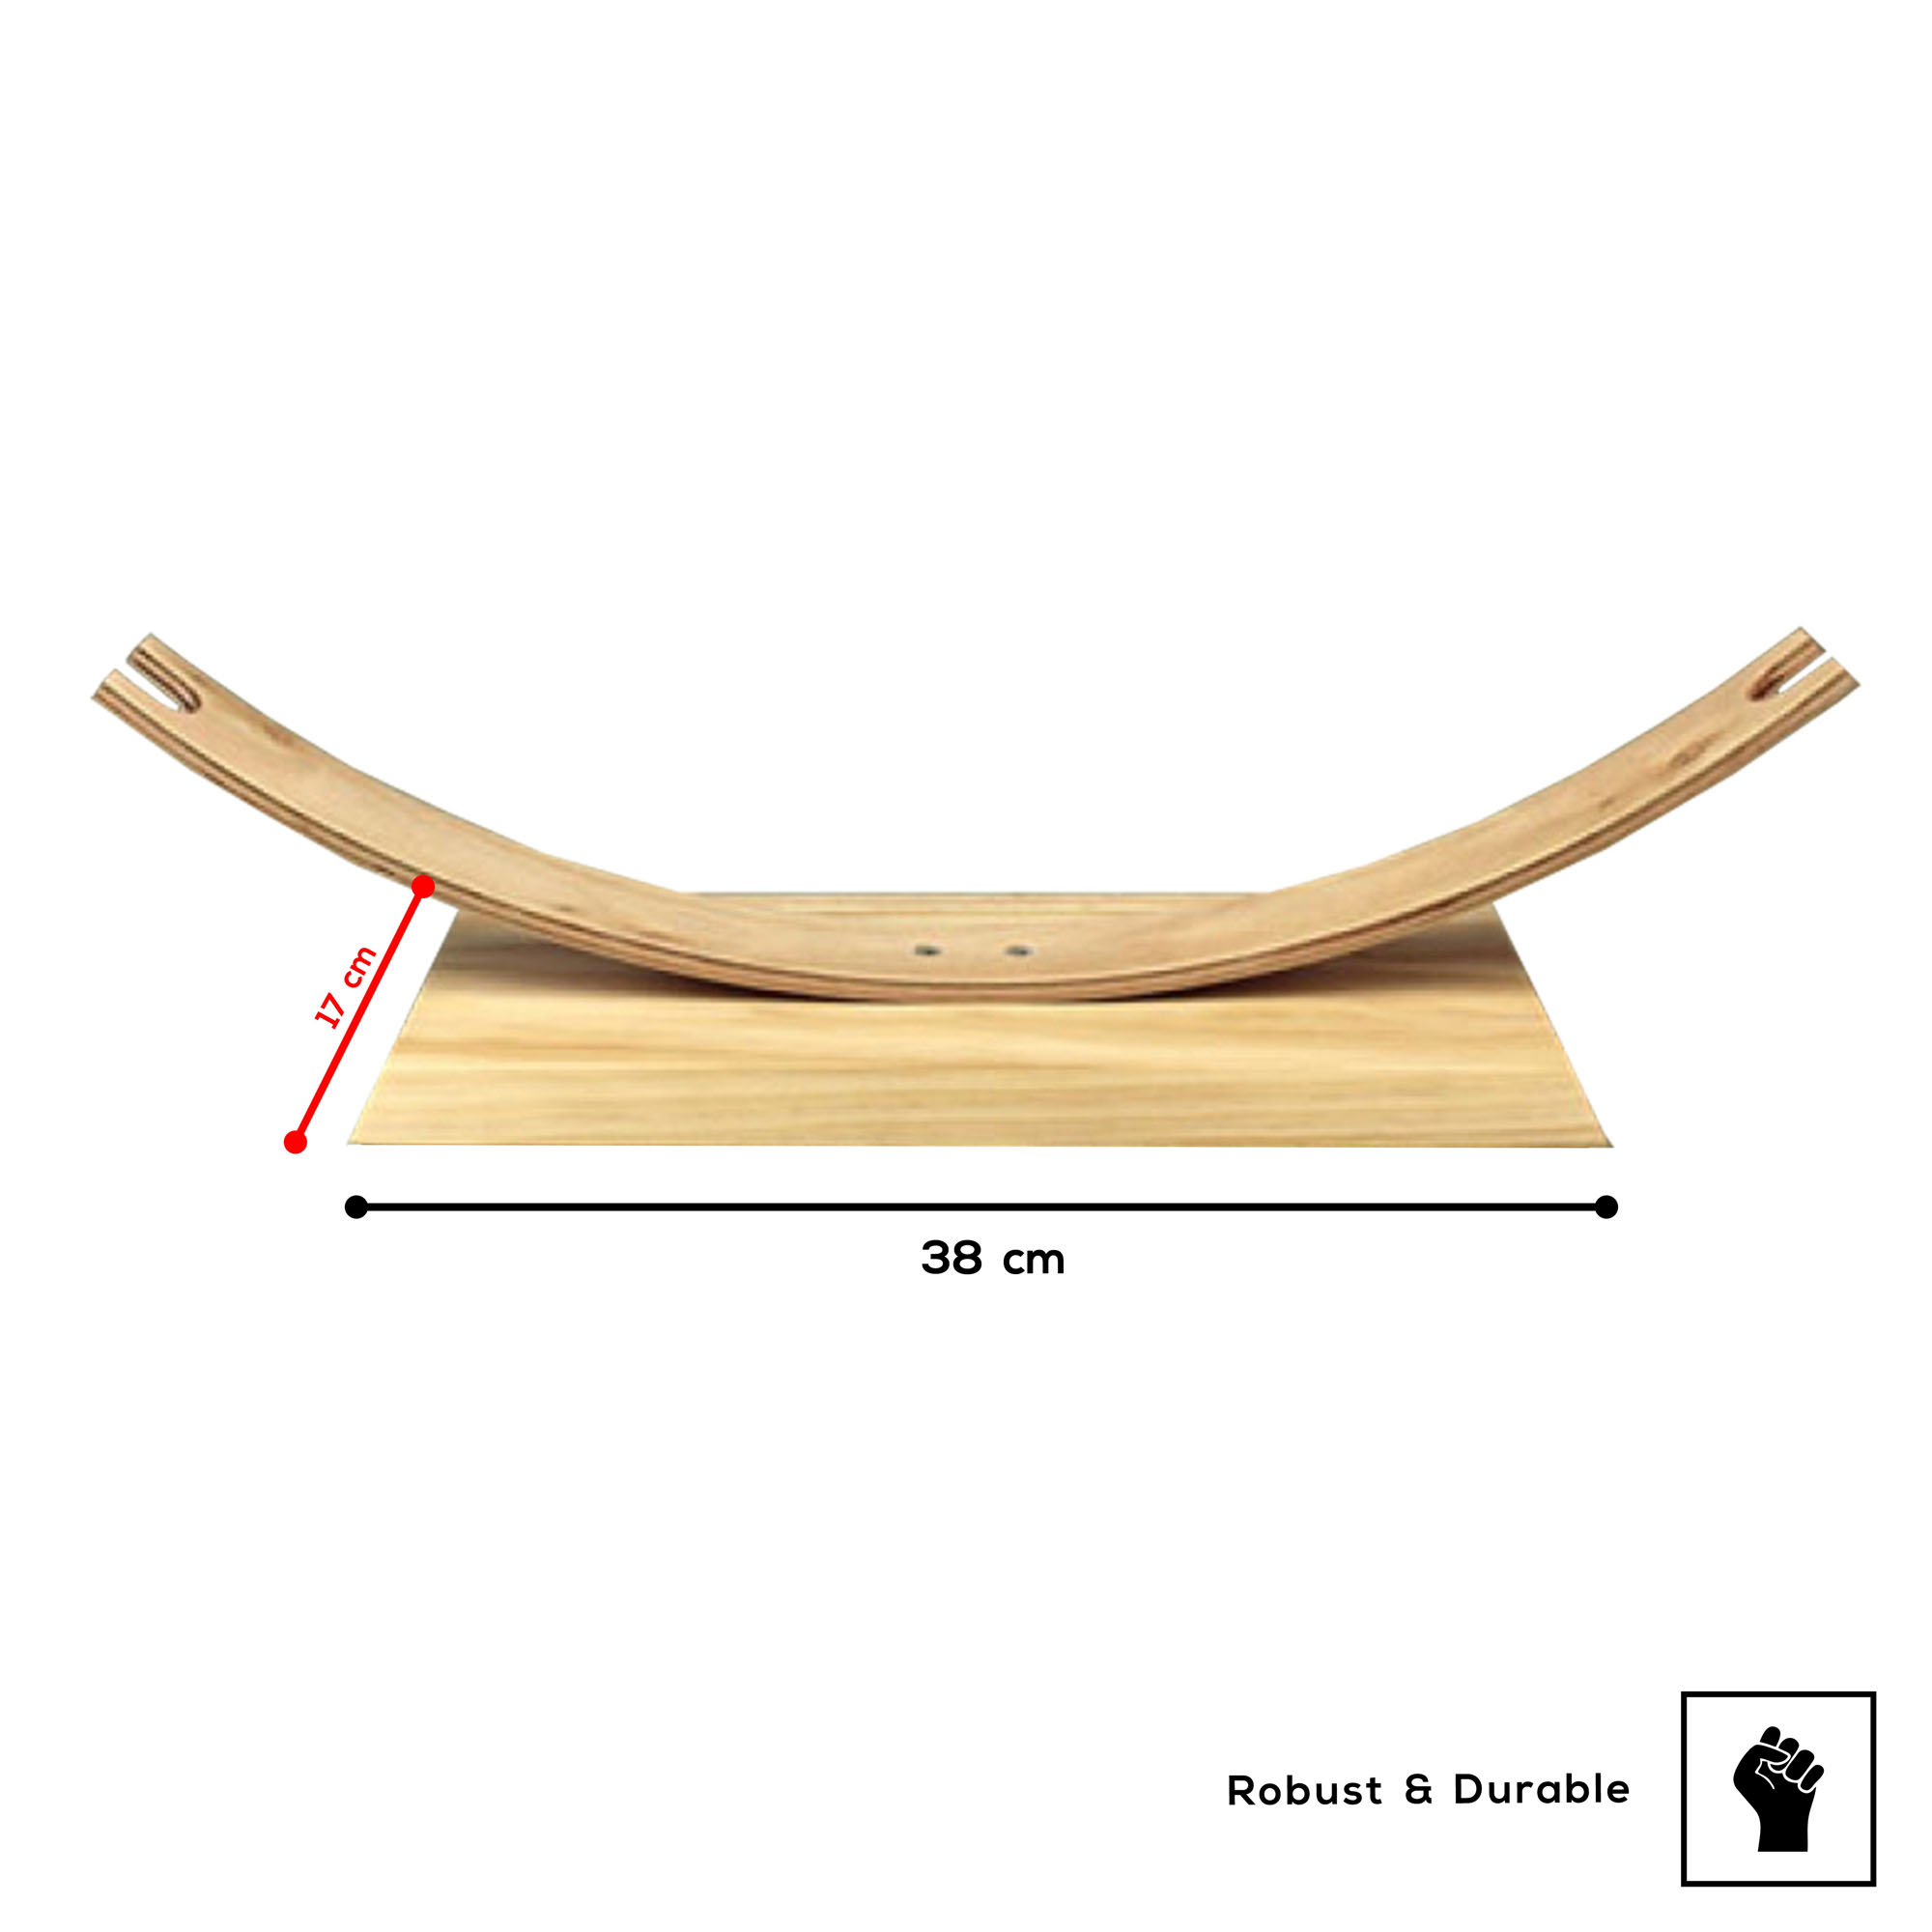 Design Sword stand for one sword – natural wood